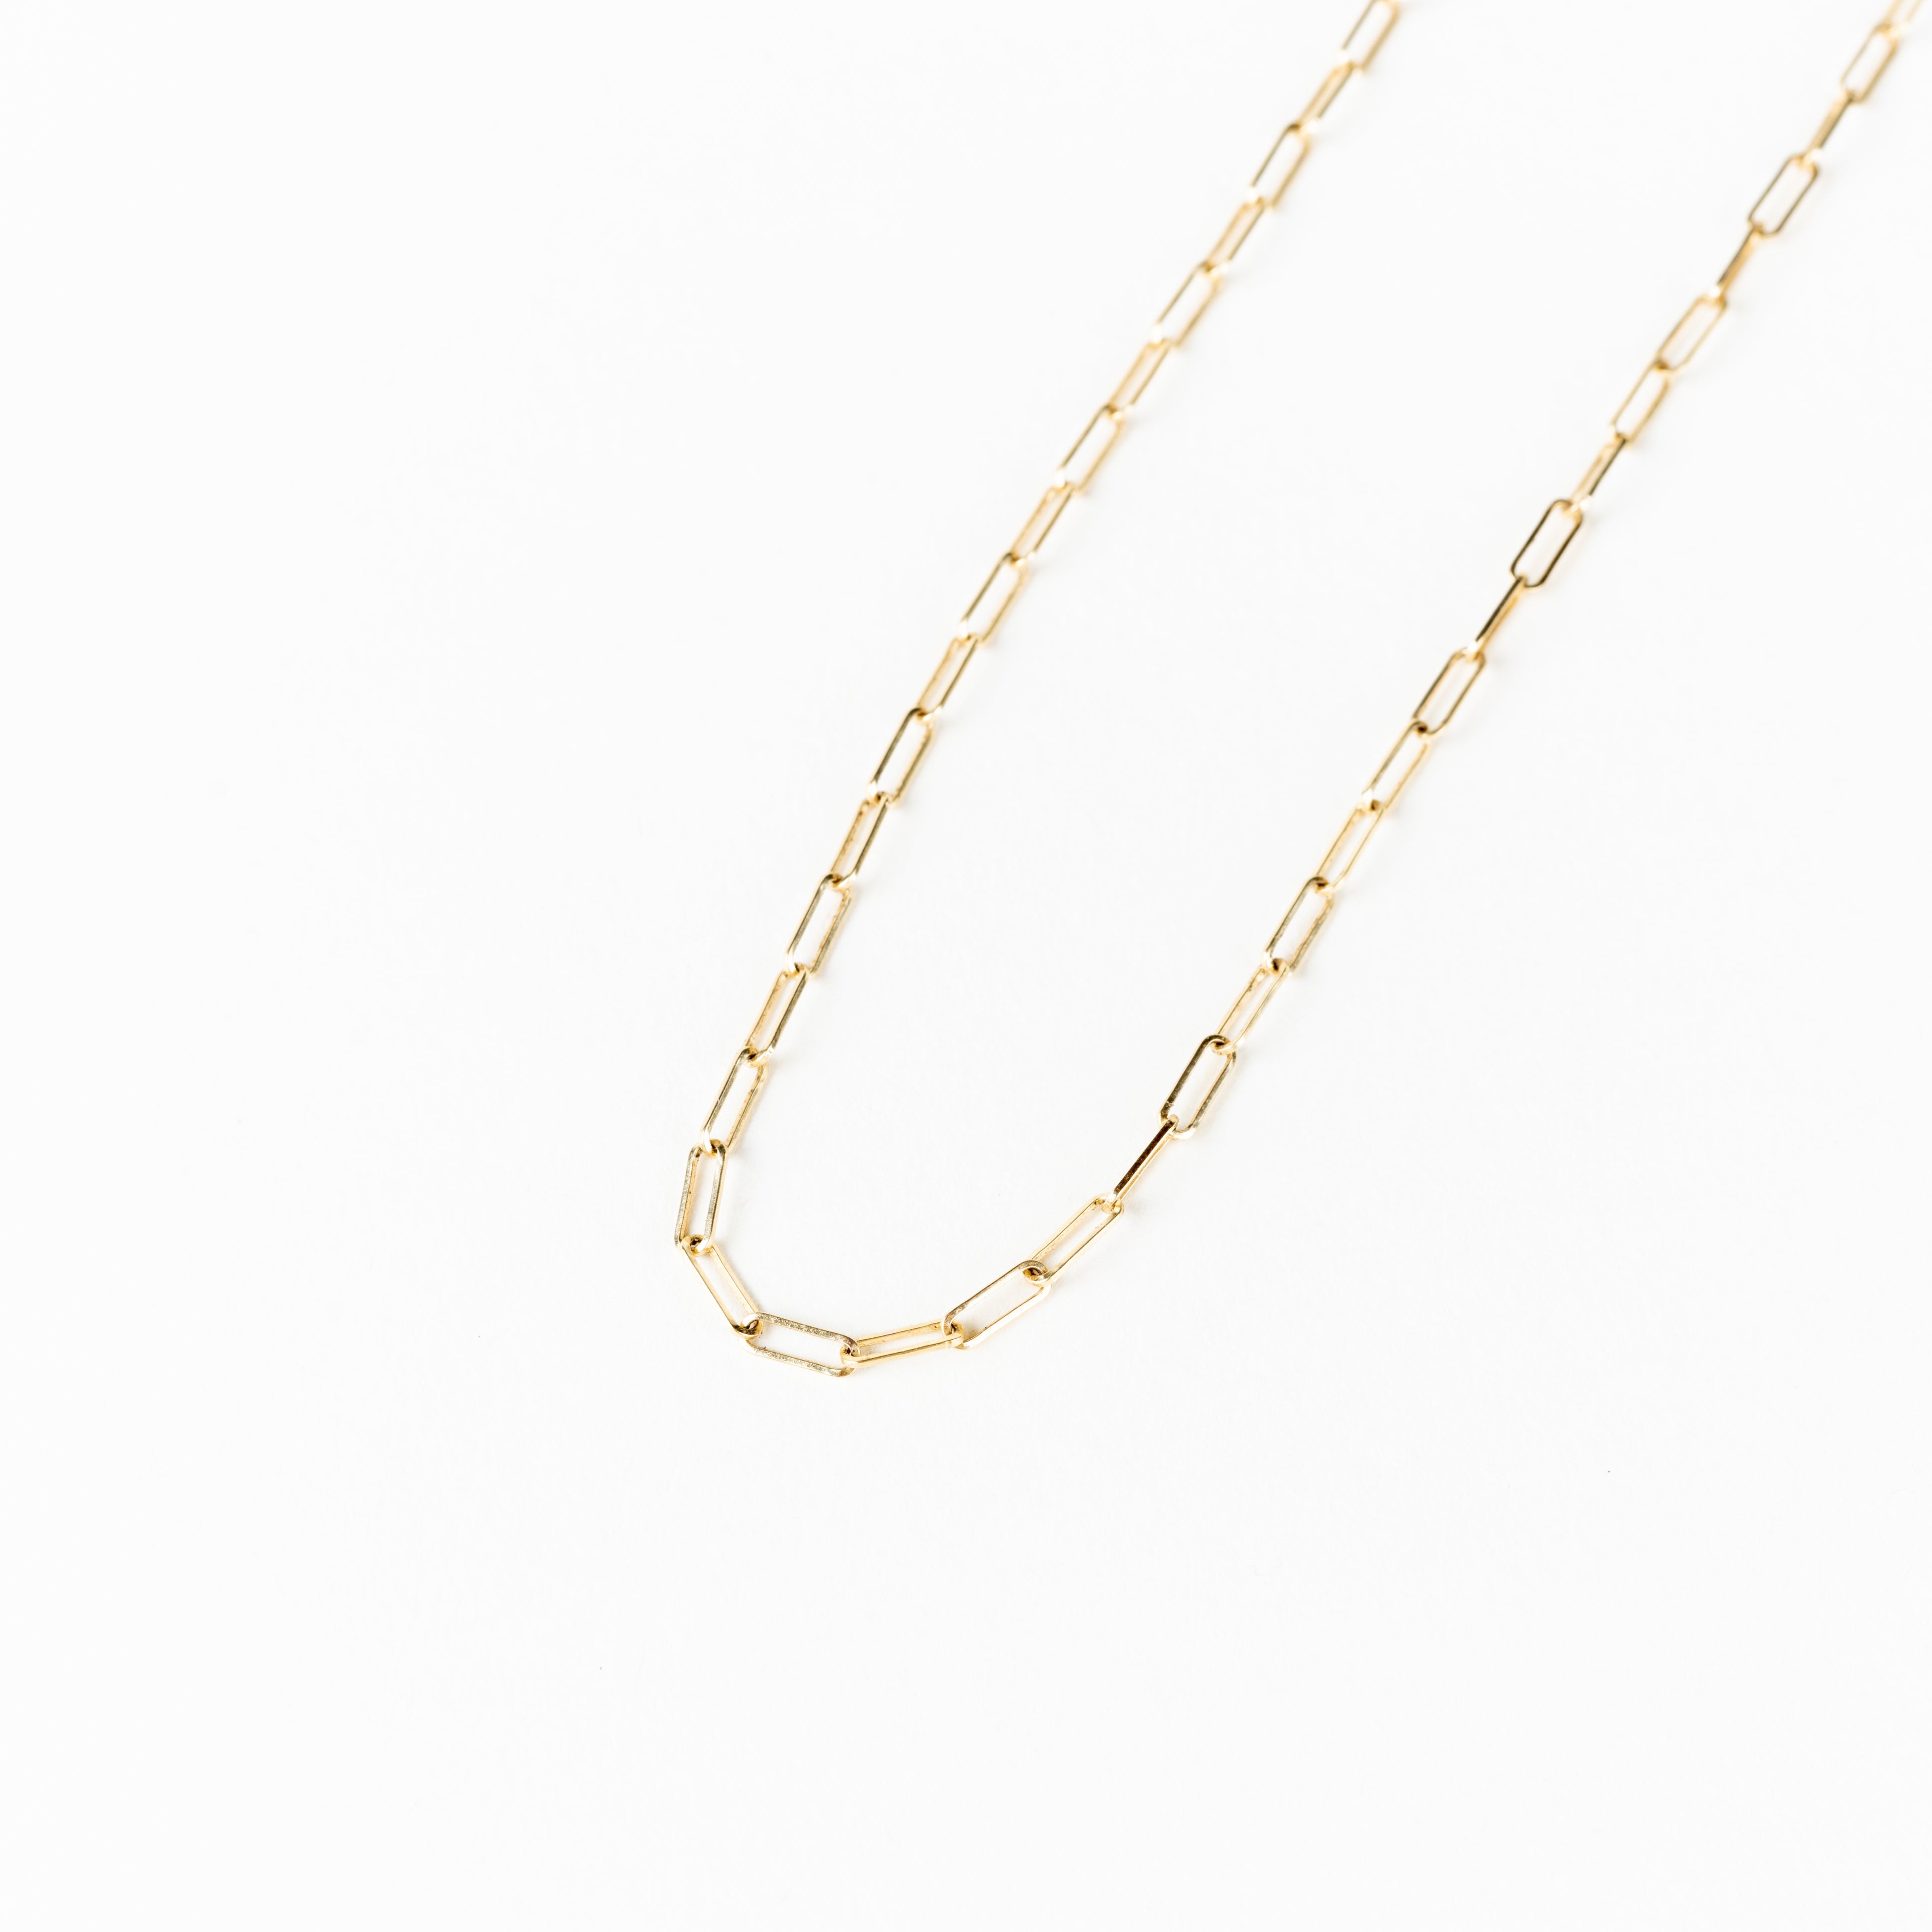 LFJ - Eclipse Gold Chain in Gold Fill or Solid Gold